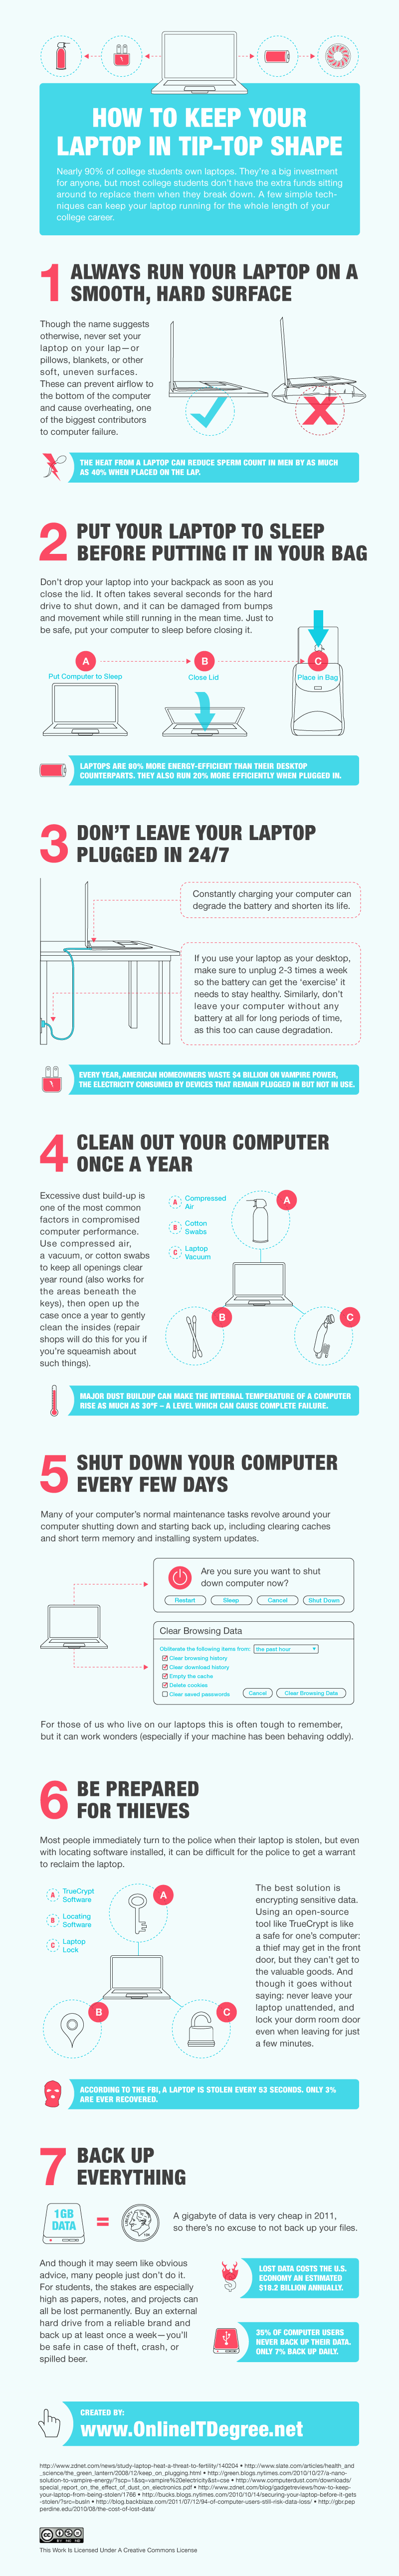 How to Keep Your Laptop in Tip-Top Shape Infographic